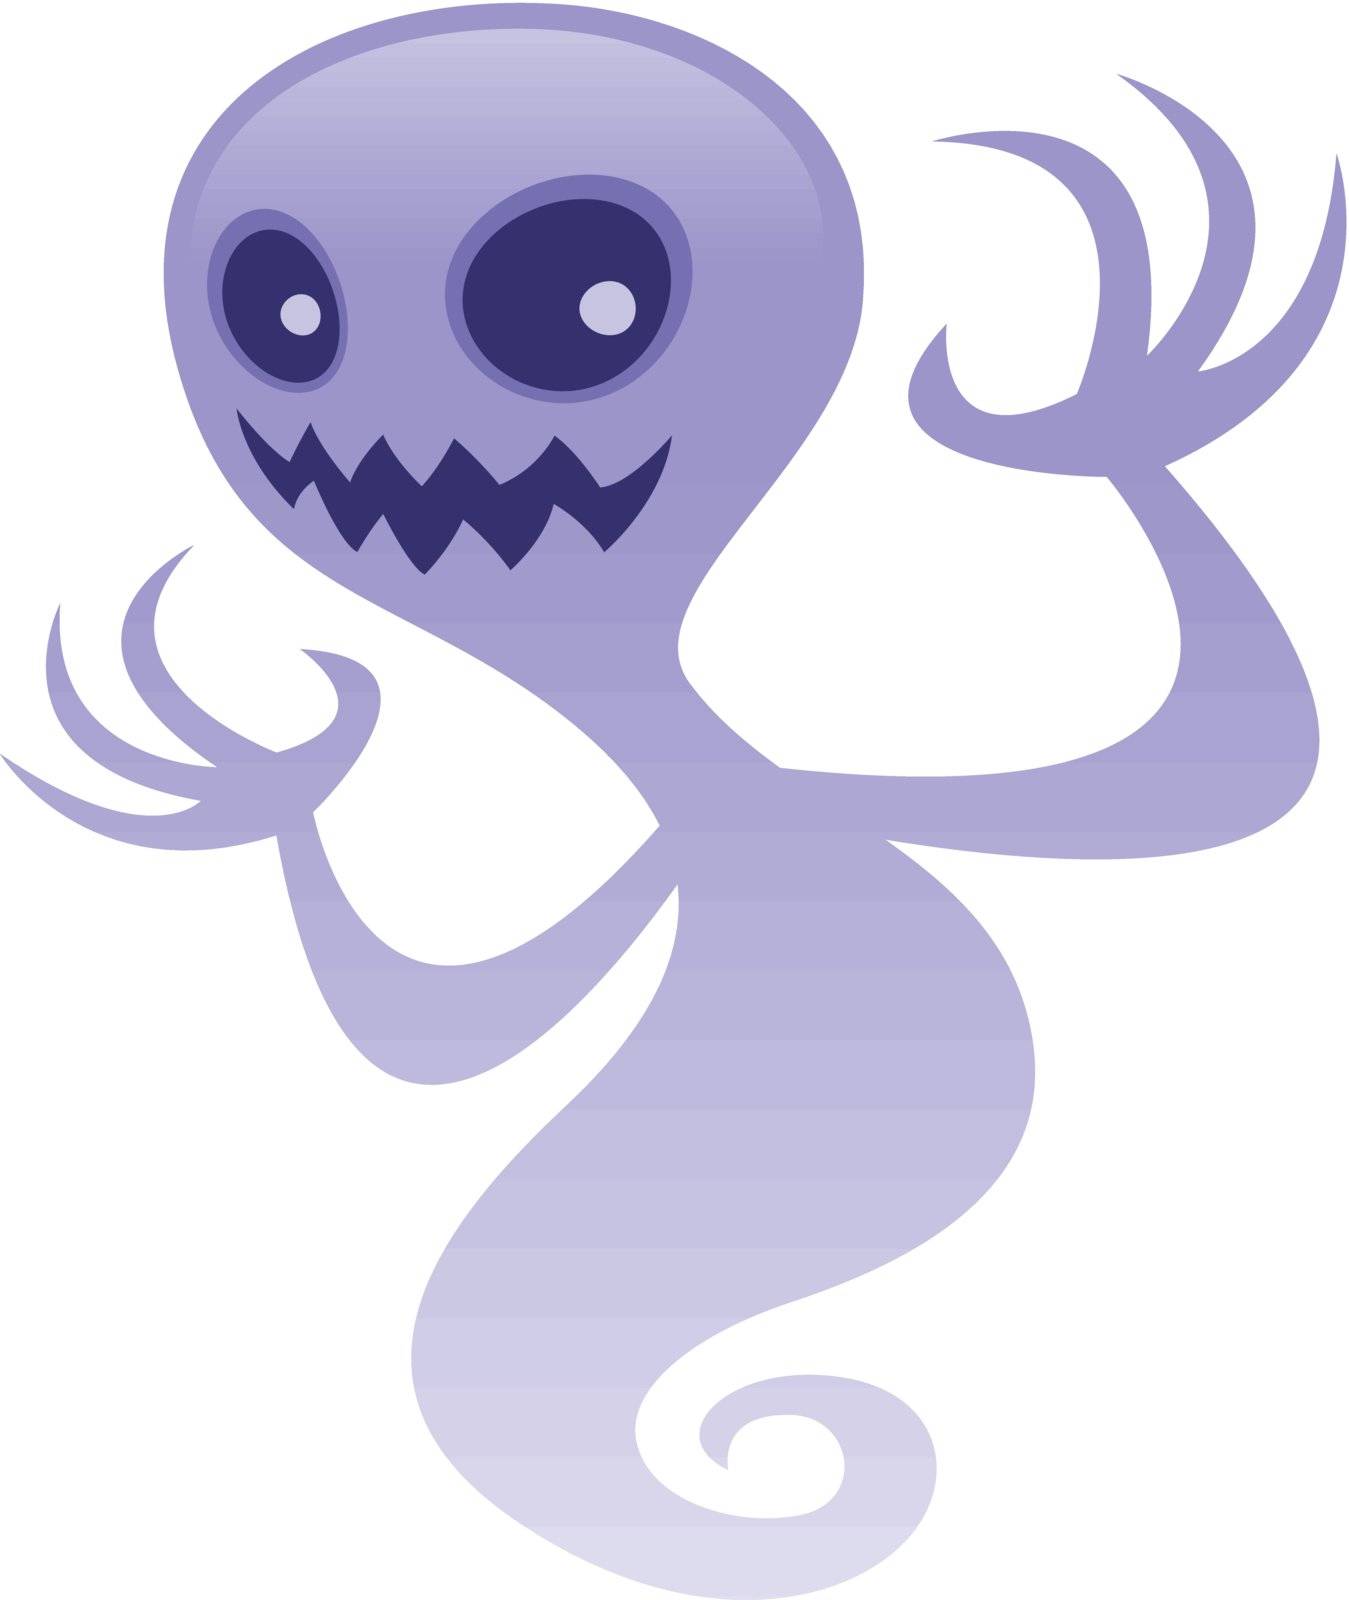 Vector cartoon illustration of a spooky ghost character with an evil grin. Great for scary Halloween designs. BOO!